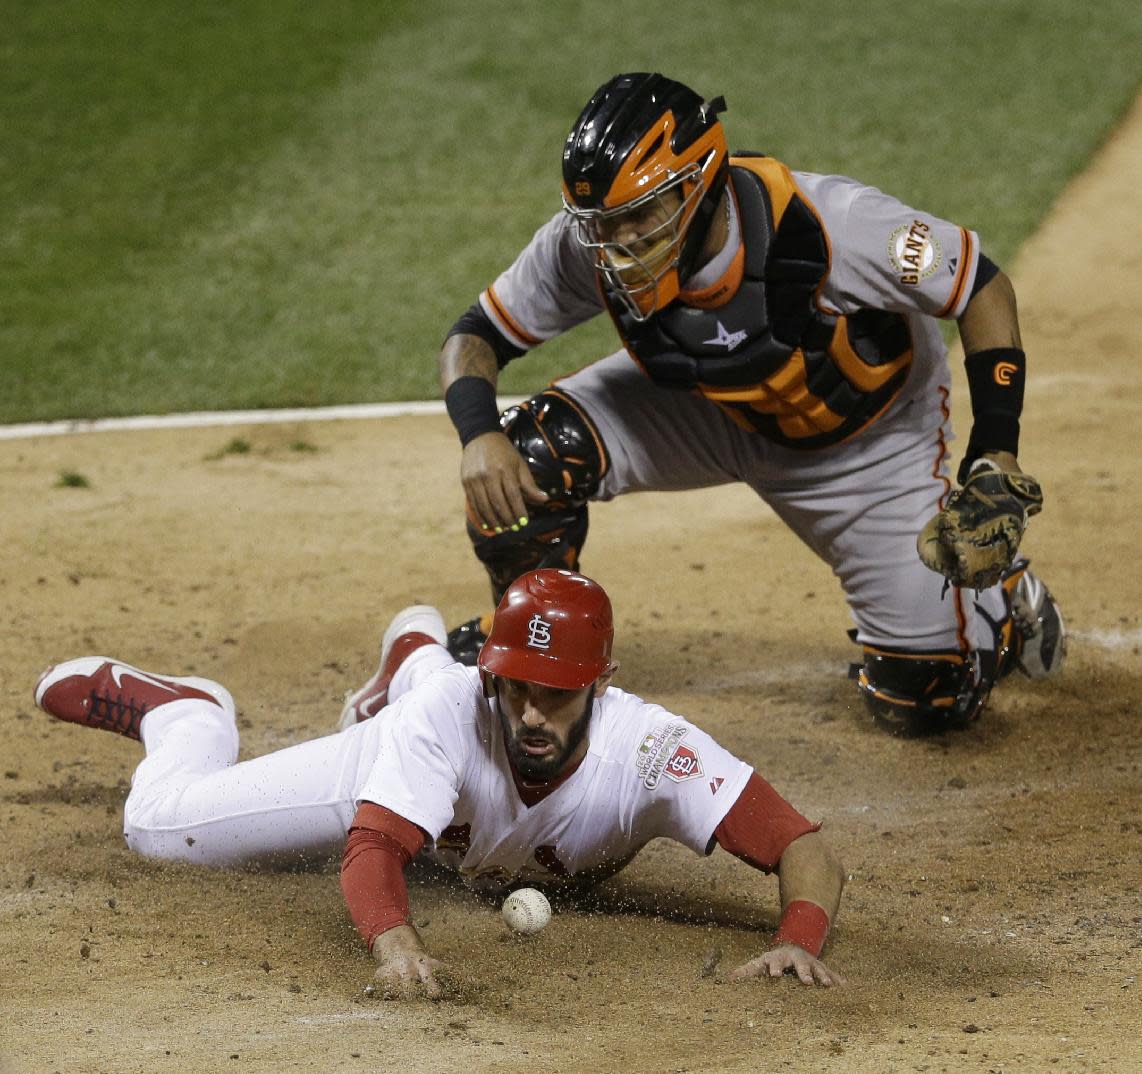 Cardinals beat Giants 8-3 to take 3-1 lead in NLCS